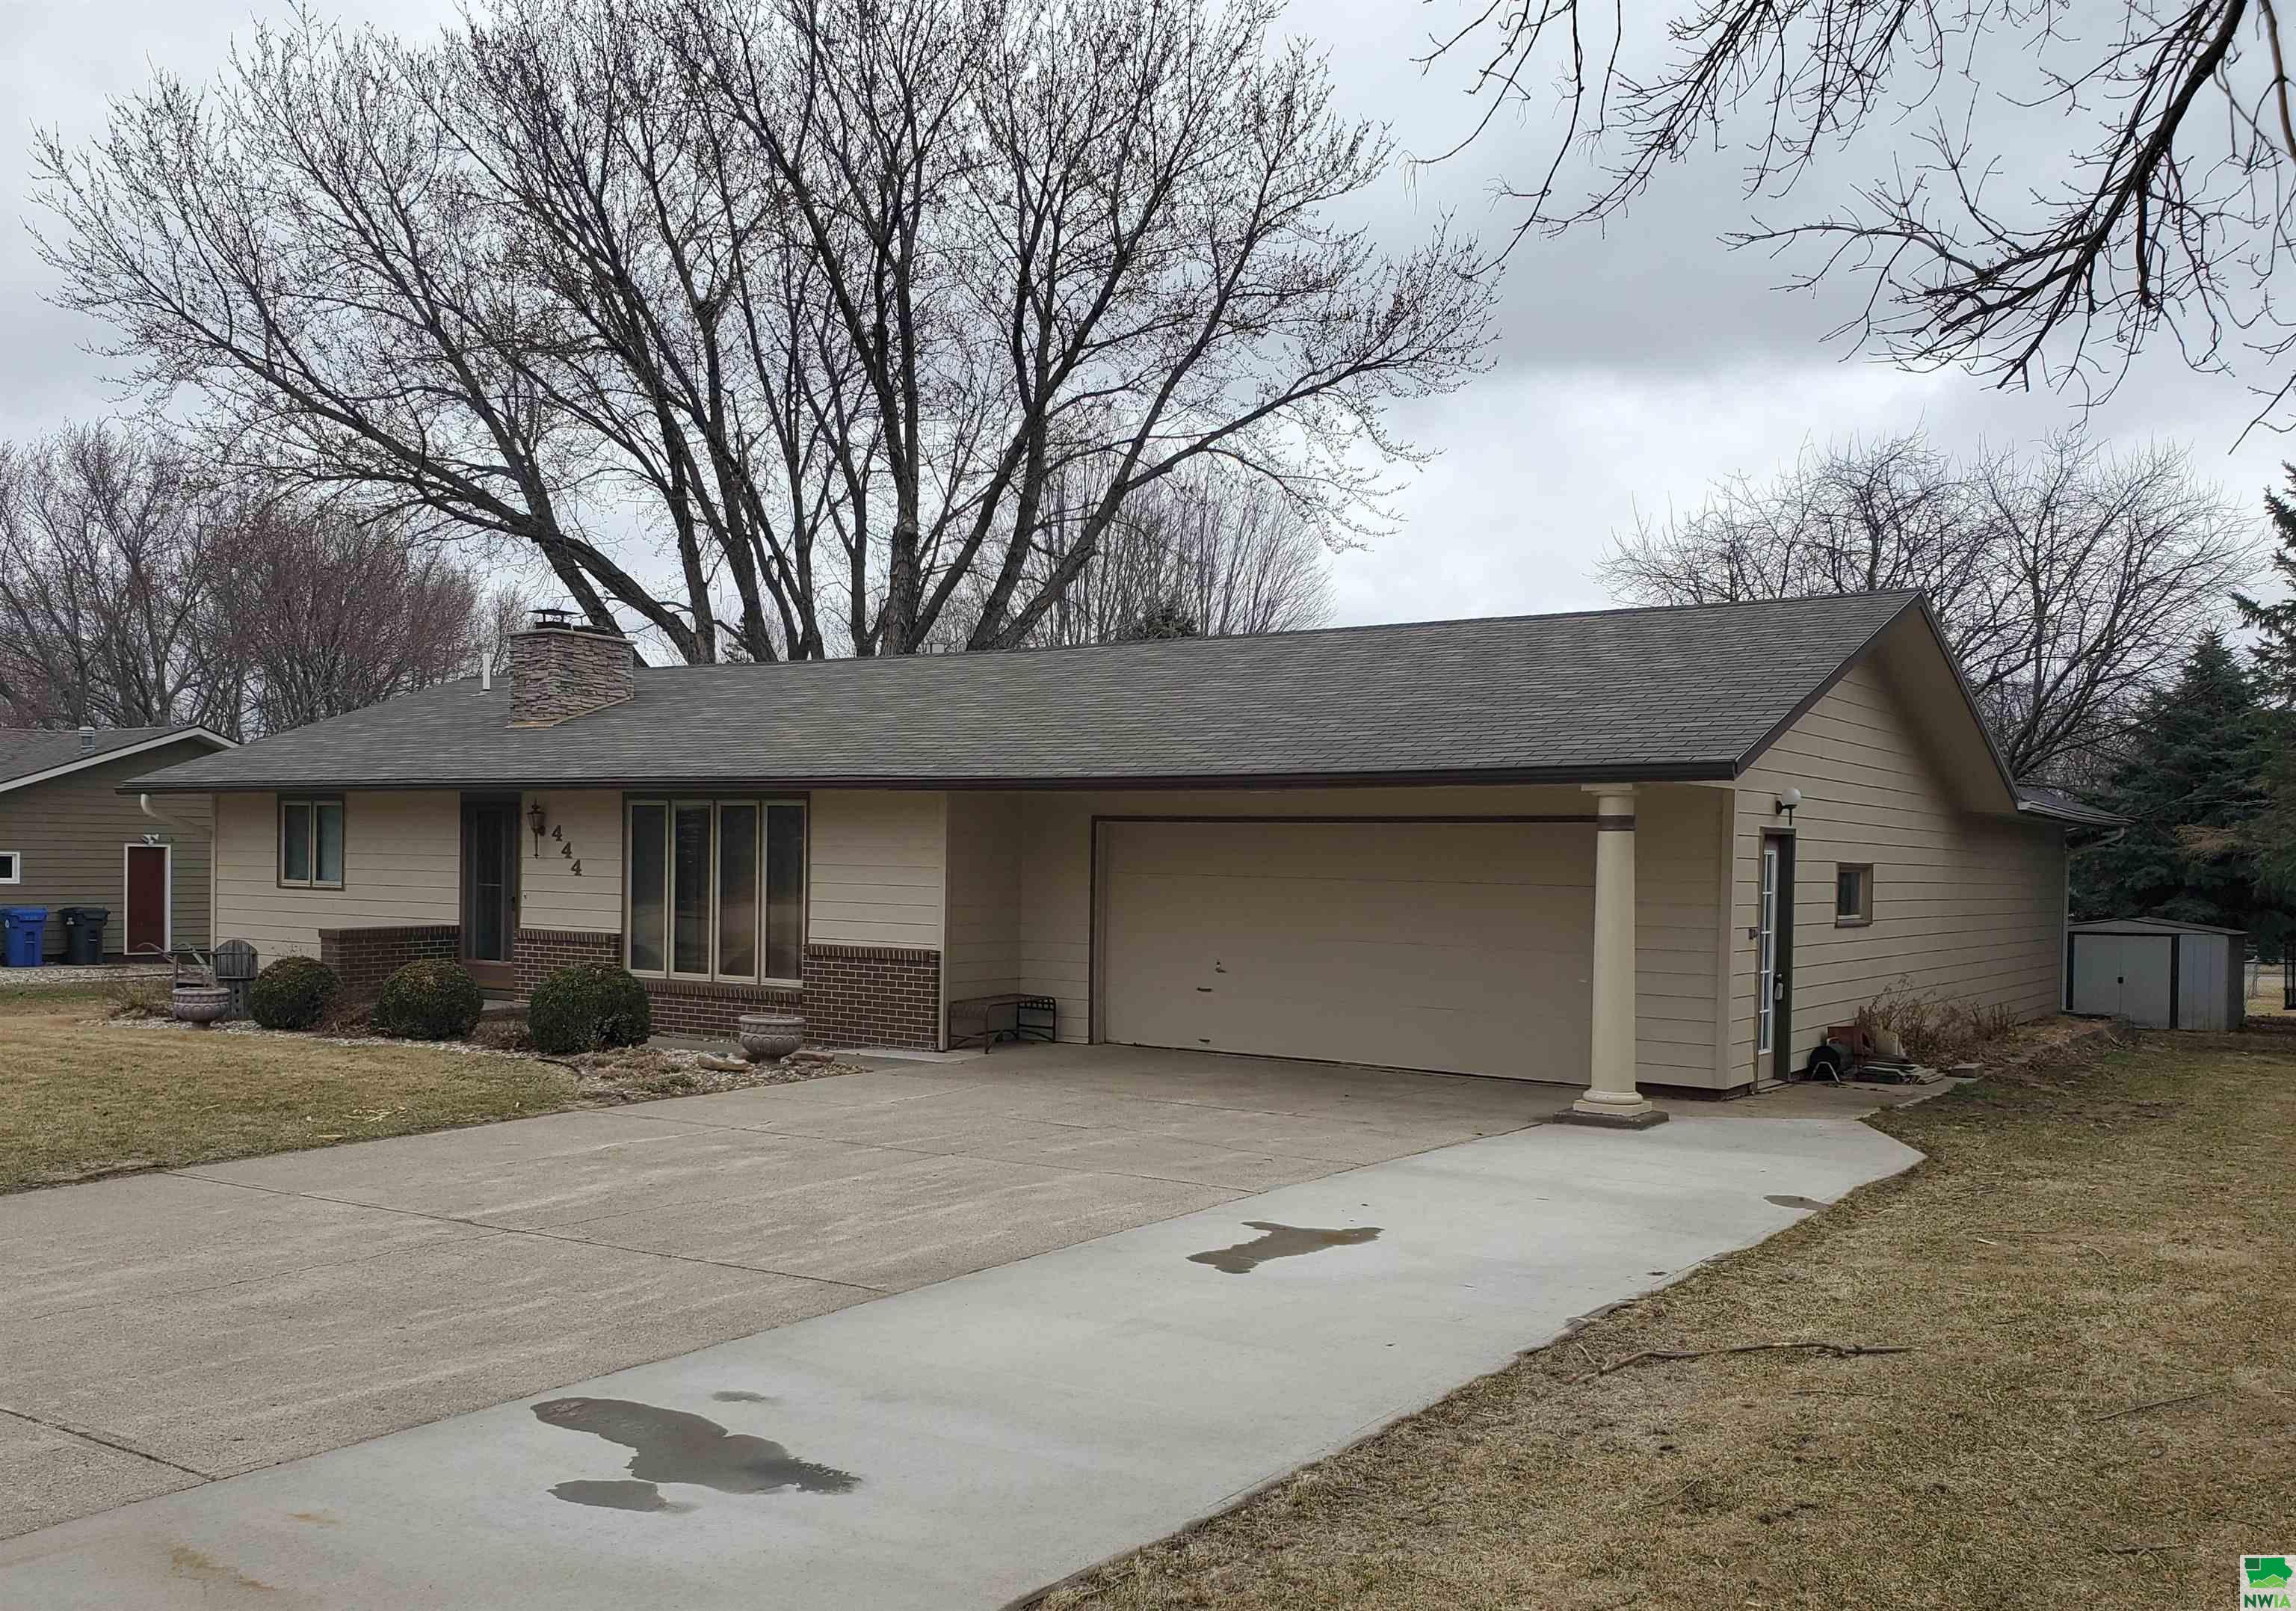 444 7th Ave. NW						  						 , Sioux Center						 , IA						  51250						  